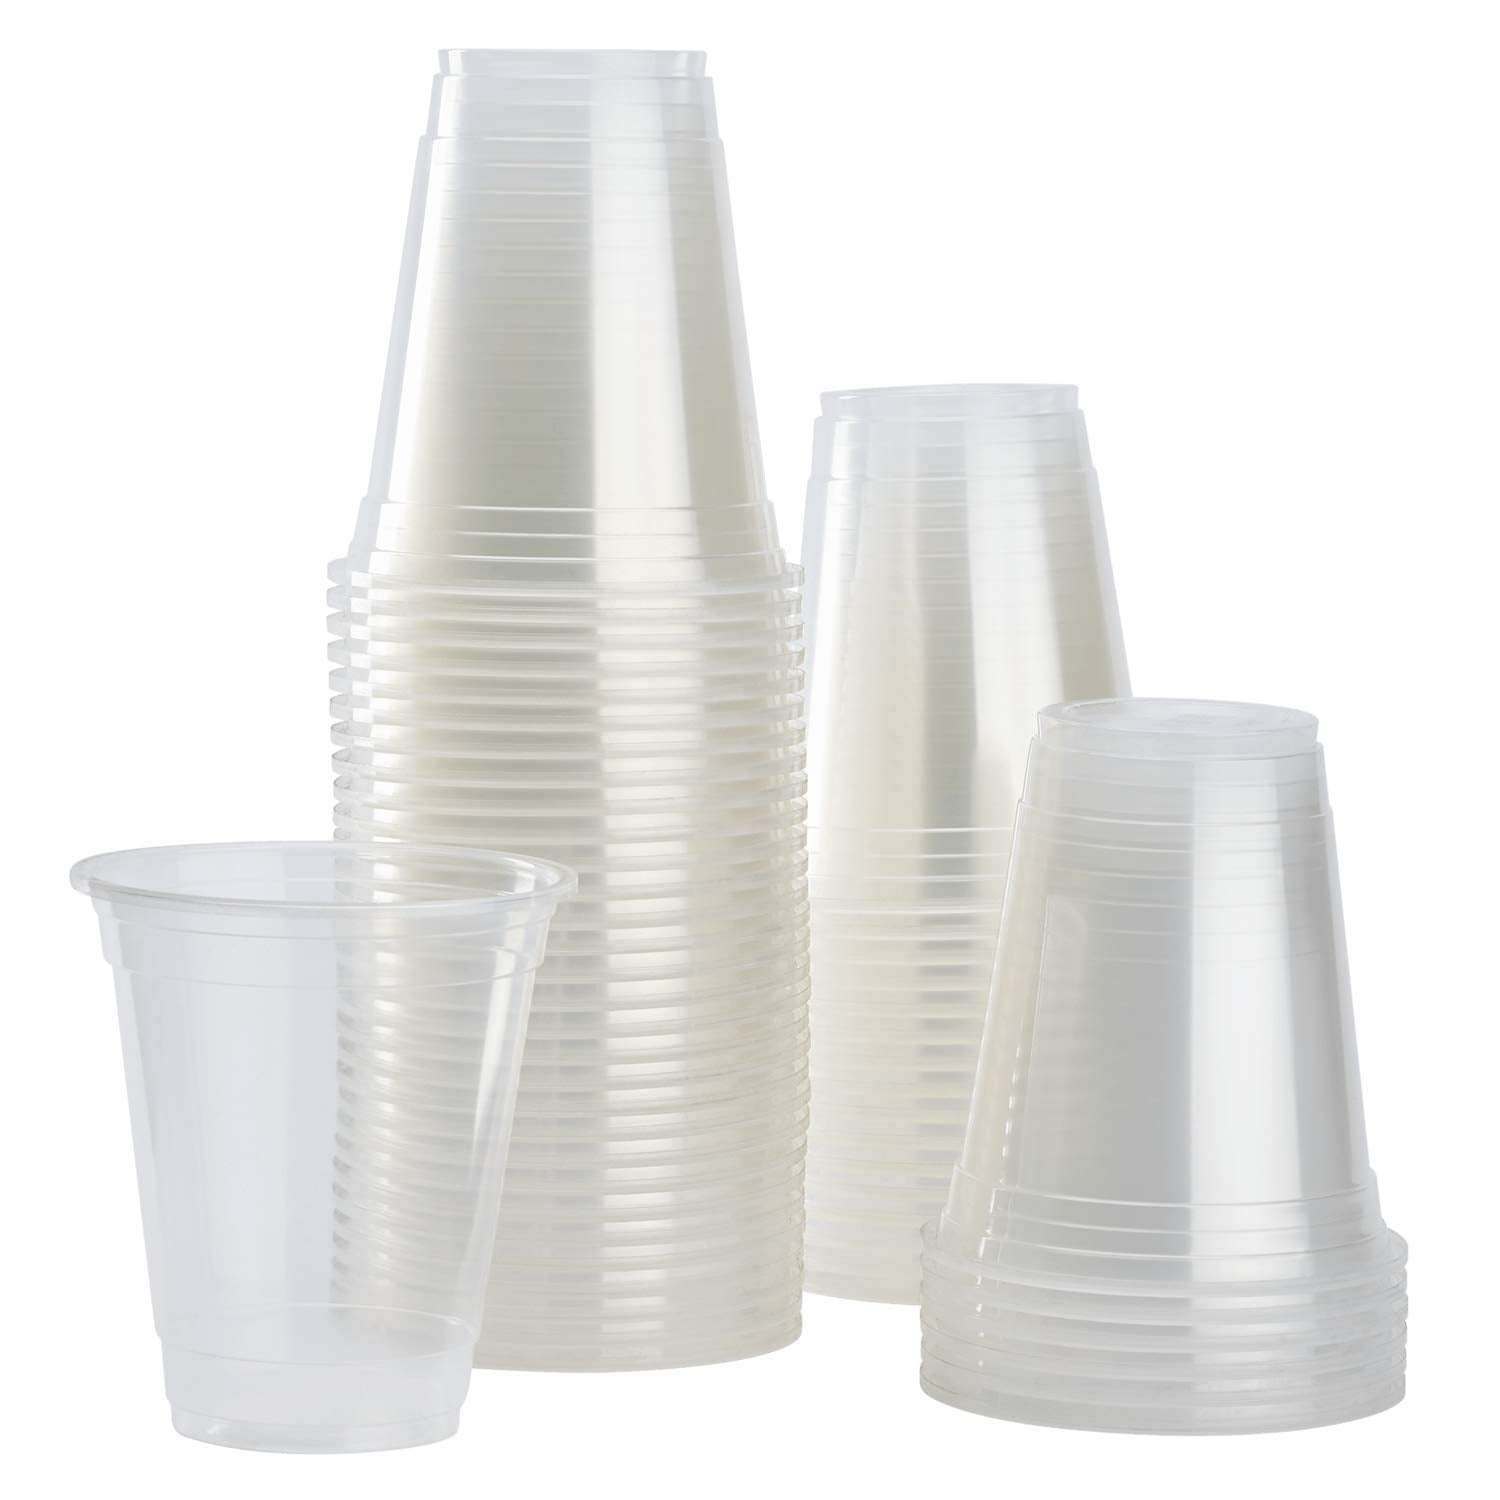 2000 Plastic Disposable Cups Water 7oz Clear Drinking Glass Party Tableware 